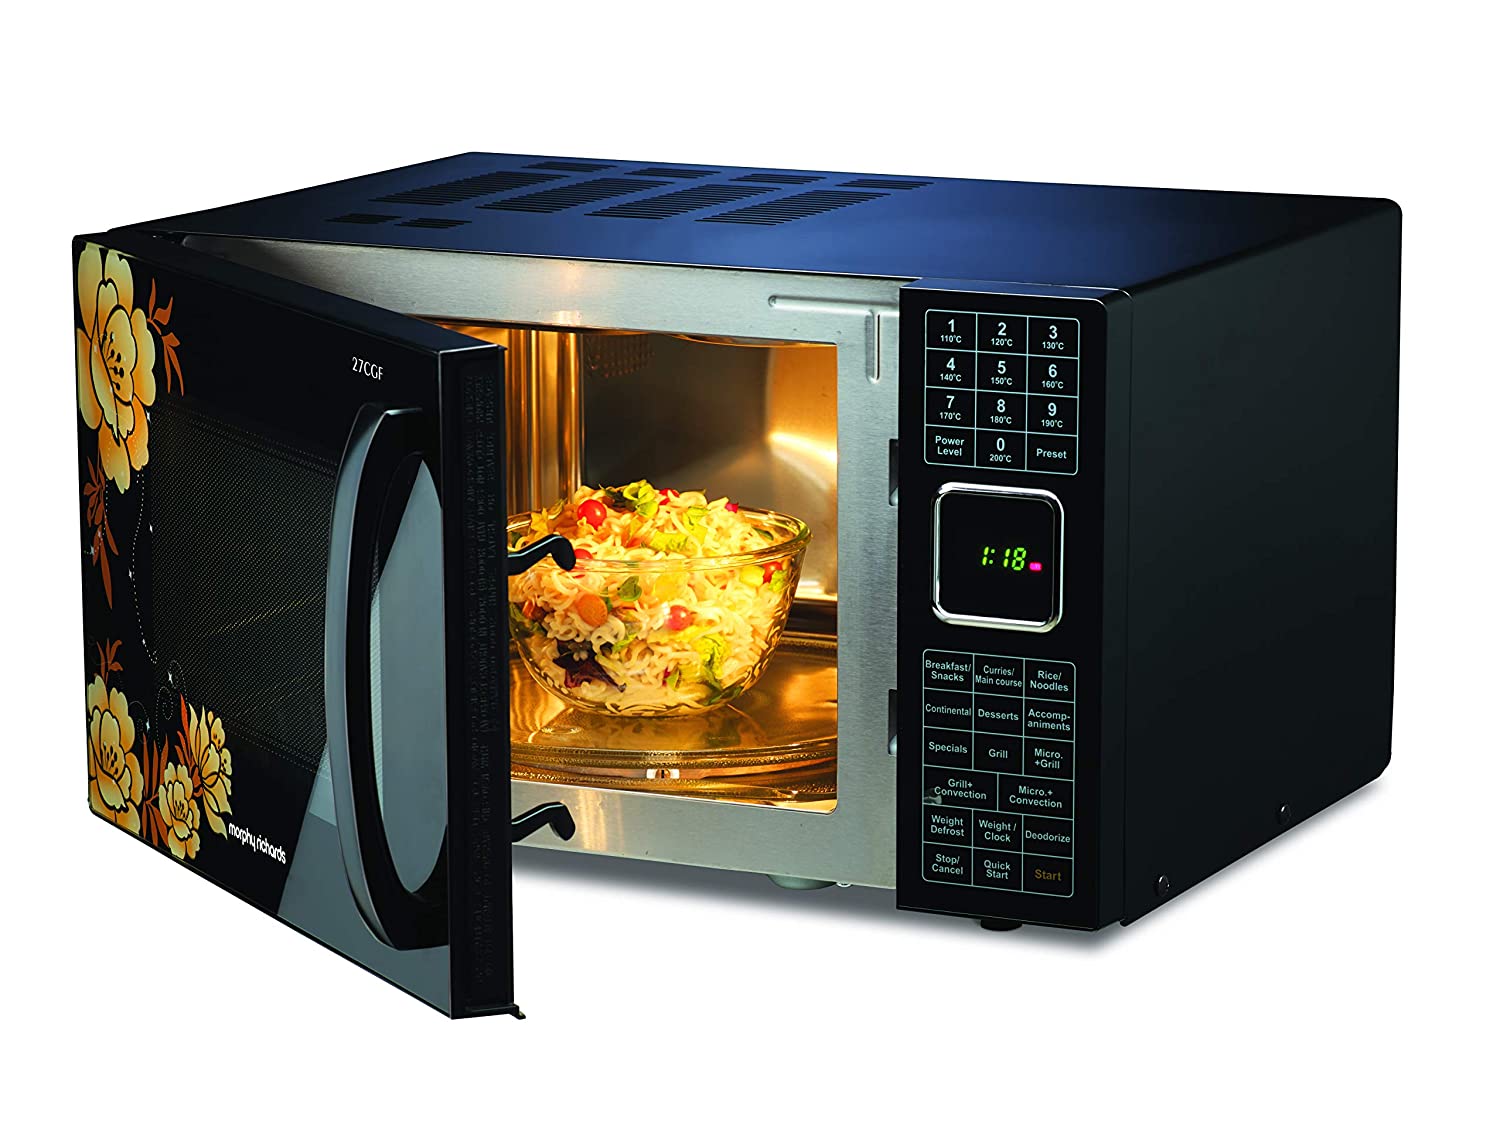 Morphy Richards 27 Ltr Floral Design Microwave Convection Oven 27CGF w